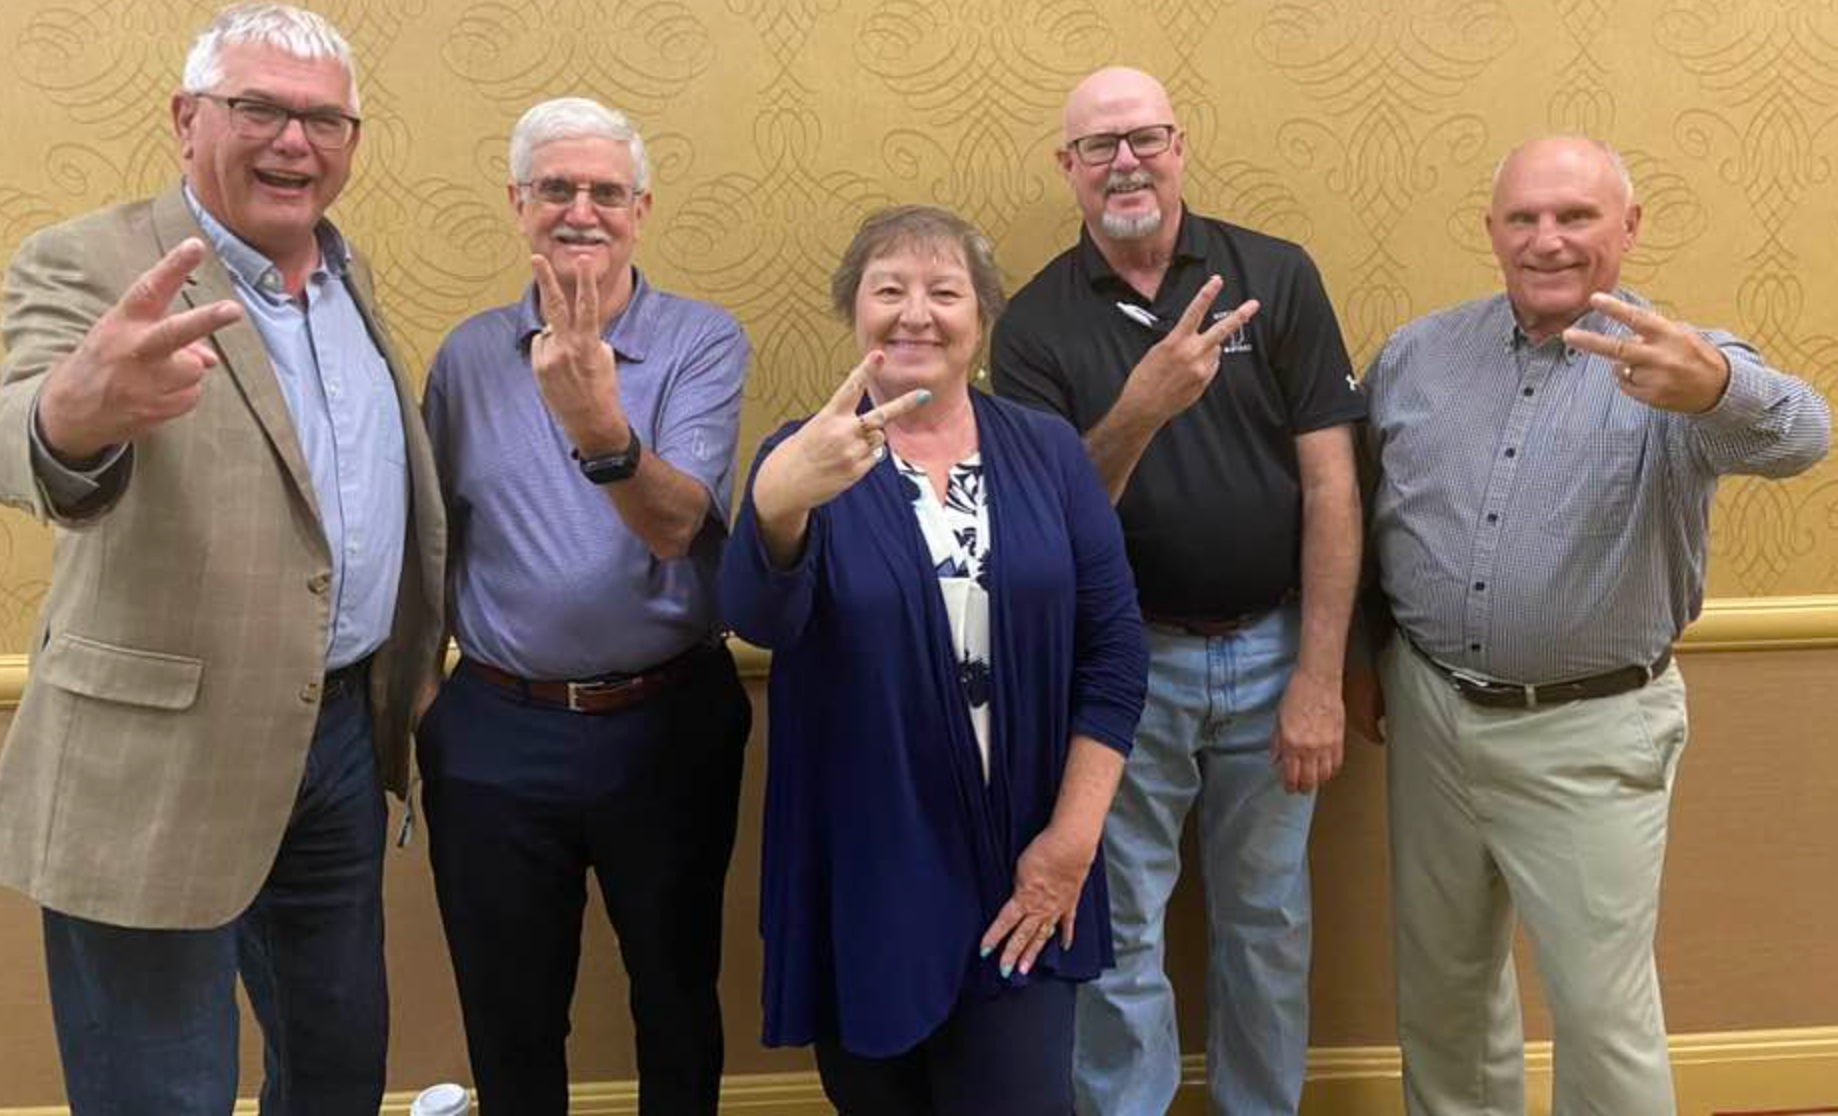 Denny Spinner, Harold “Huck” Lewis, Cathy Gross, Mark Senter, and Terry Seitz (pictured L-R) smiling for camera and holding their fingers in a V.